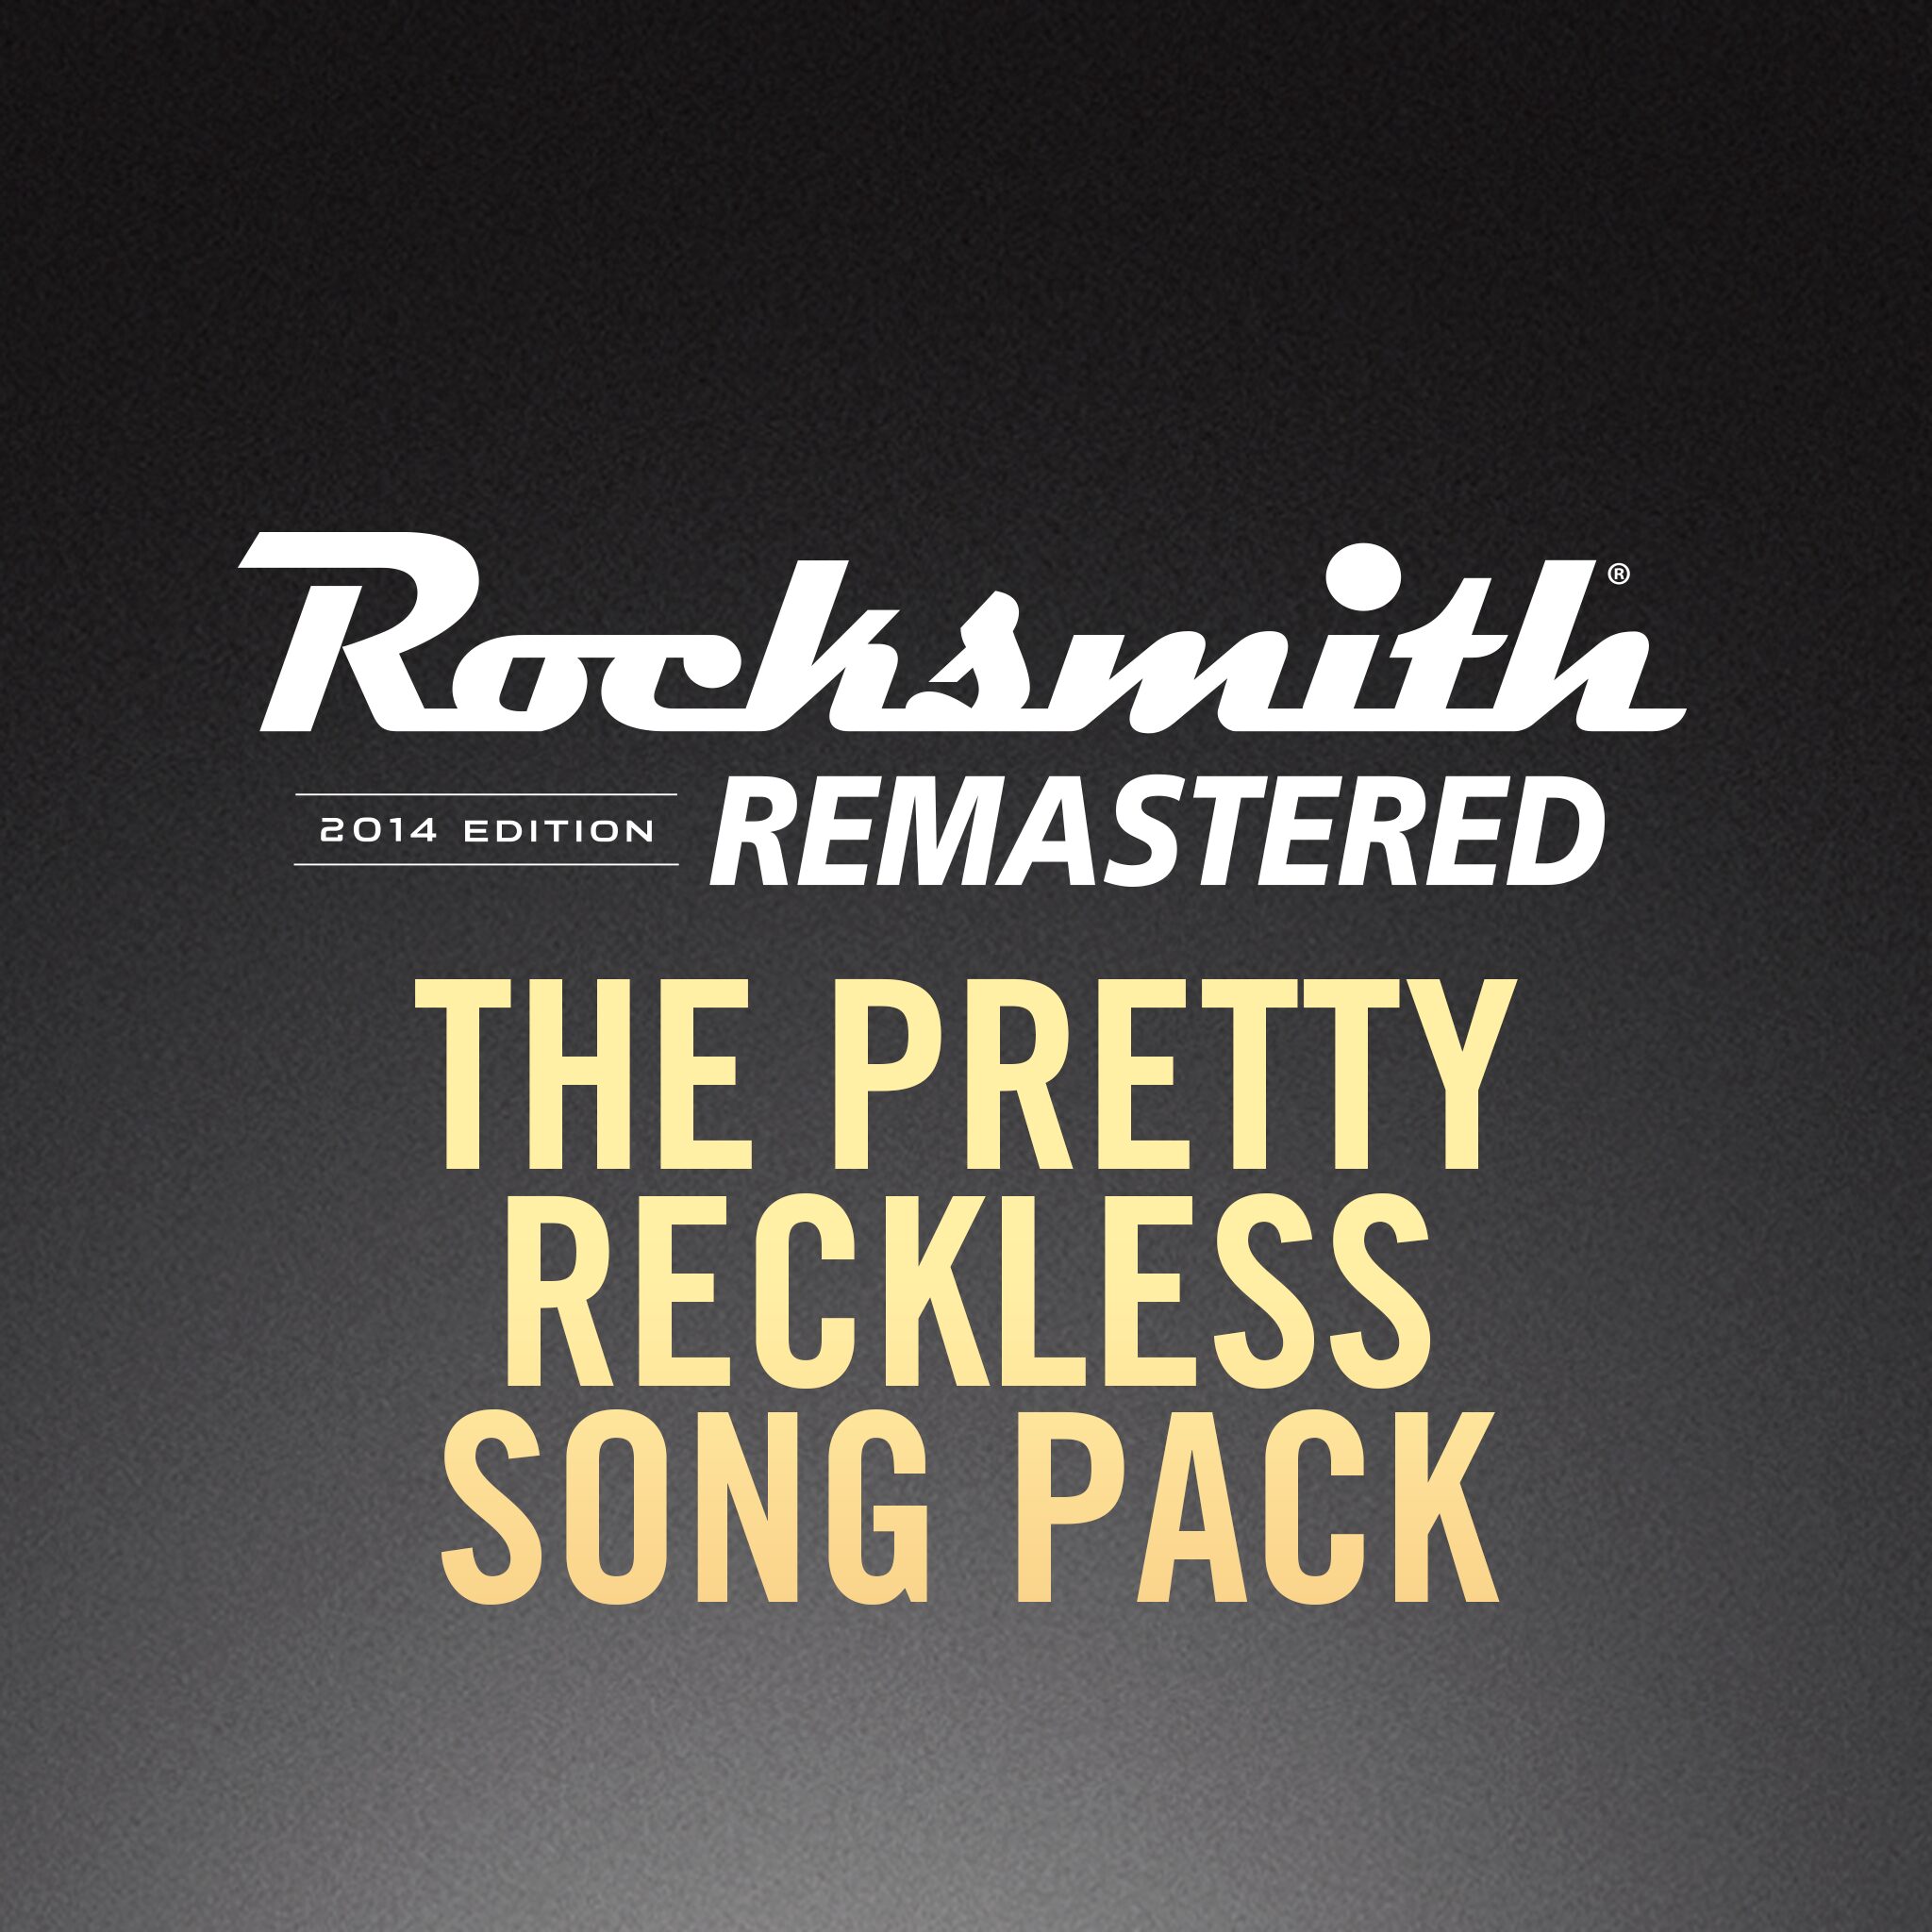 Rocksmith 2014 - The Pretty Reckless Song Pack